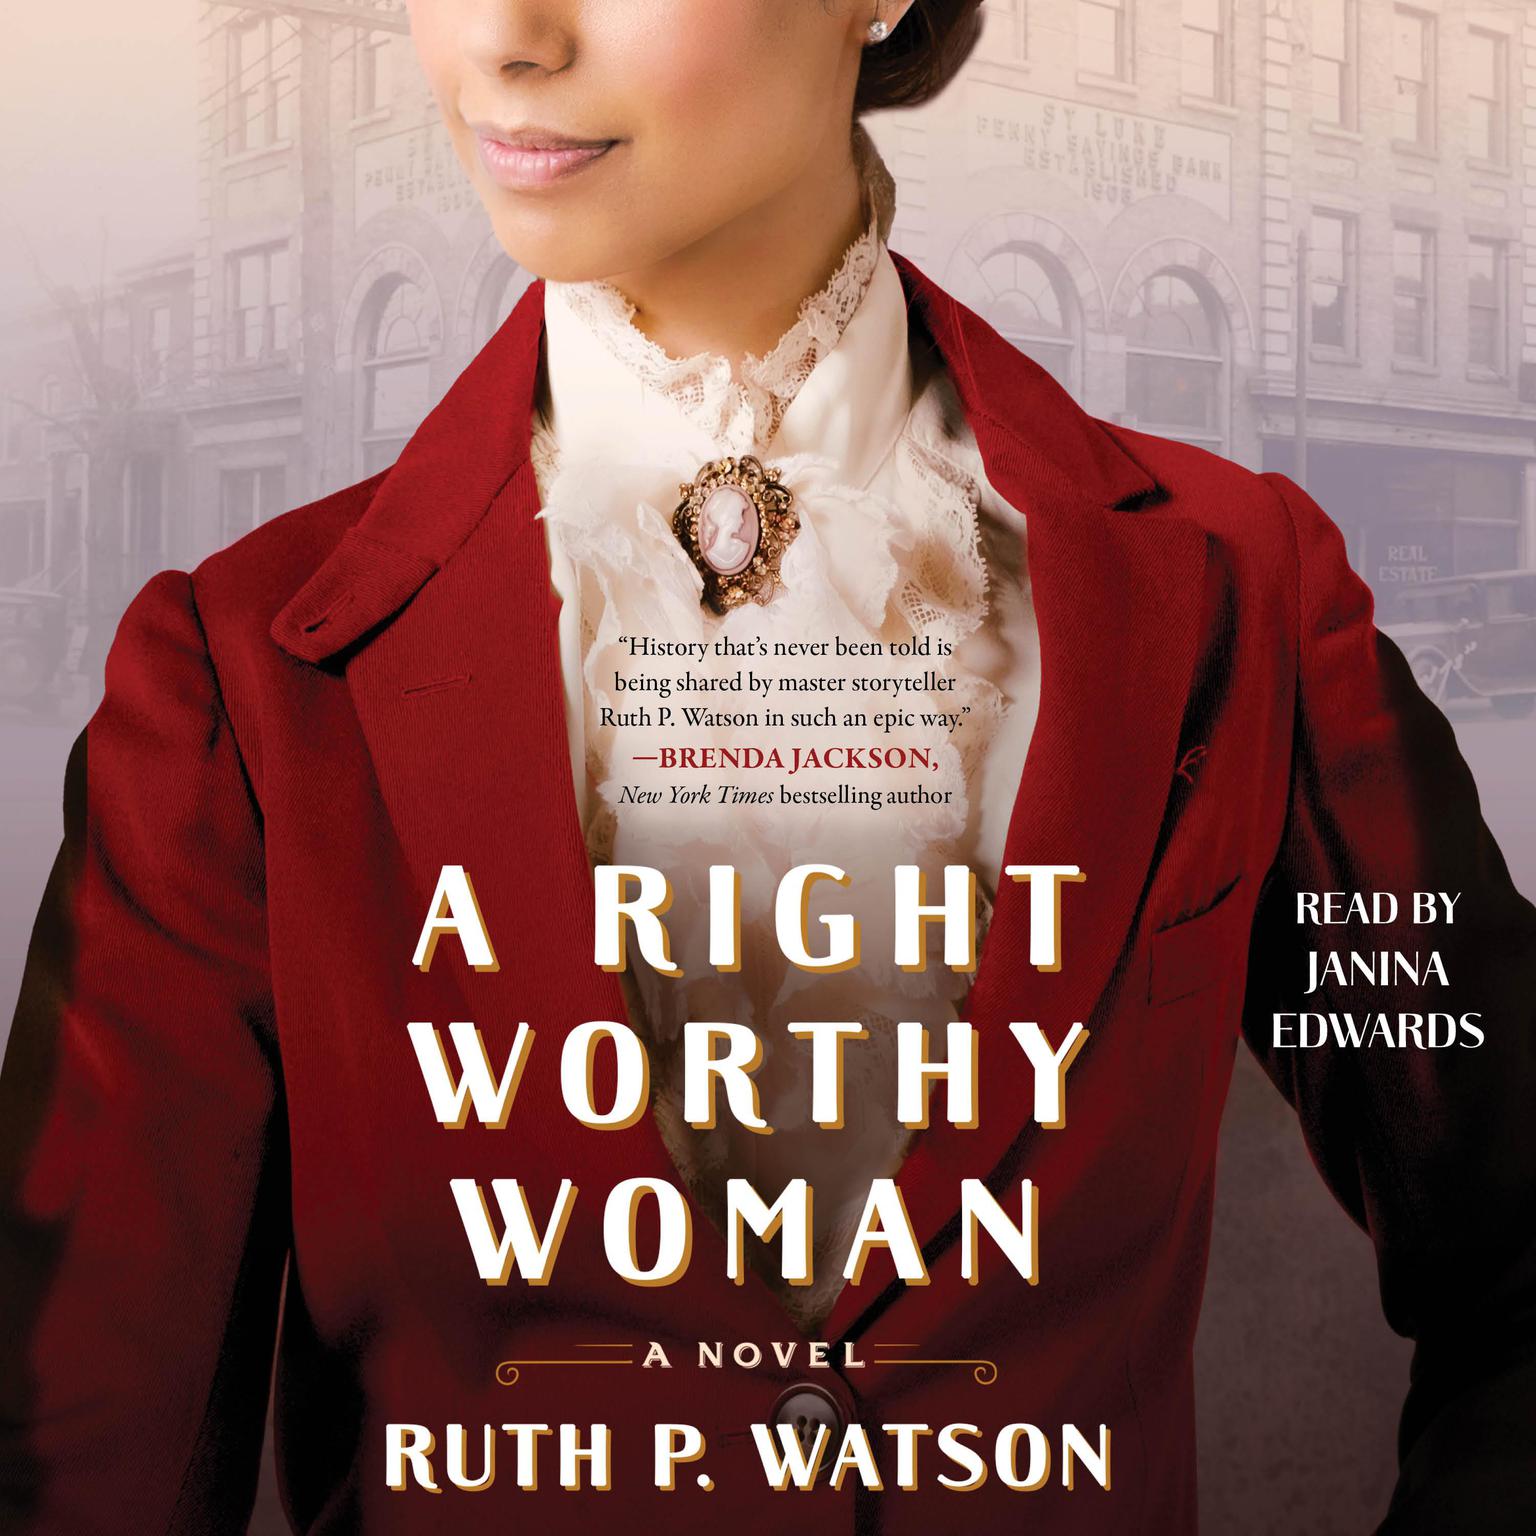 A Right Worthy Woman: A Novel Audiobook, by Ruth P. Watson